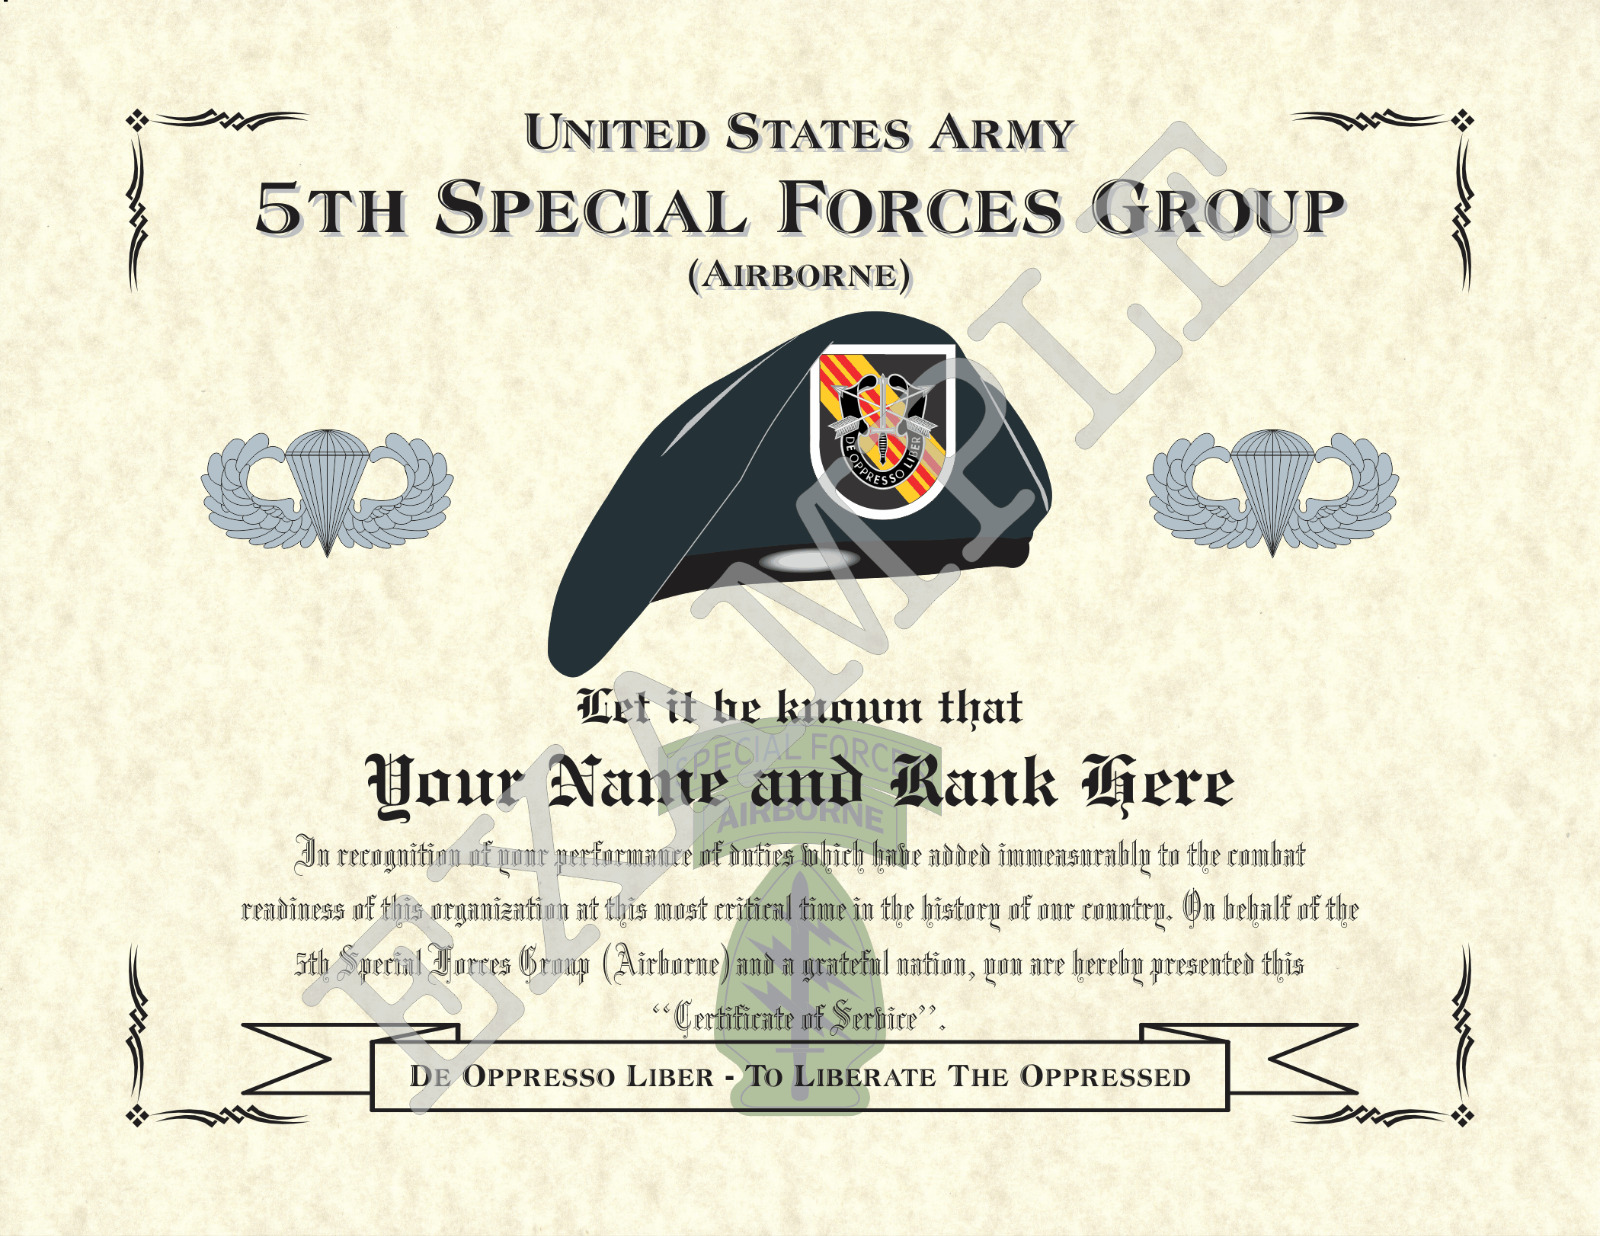 5th Special Forces Group (A) Personalized Art Print 8.5 x 11 (BADGE/BLK VIET)